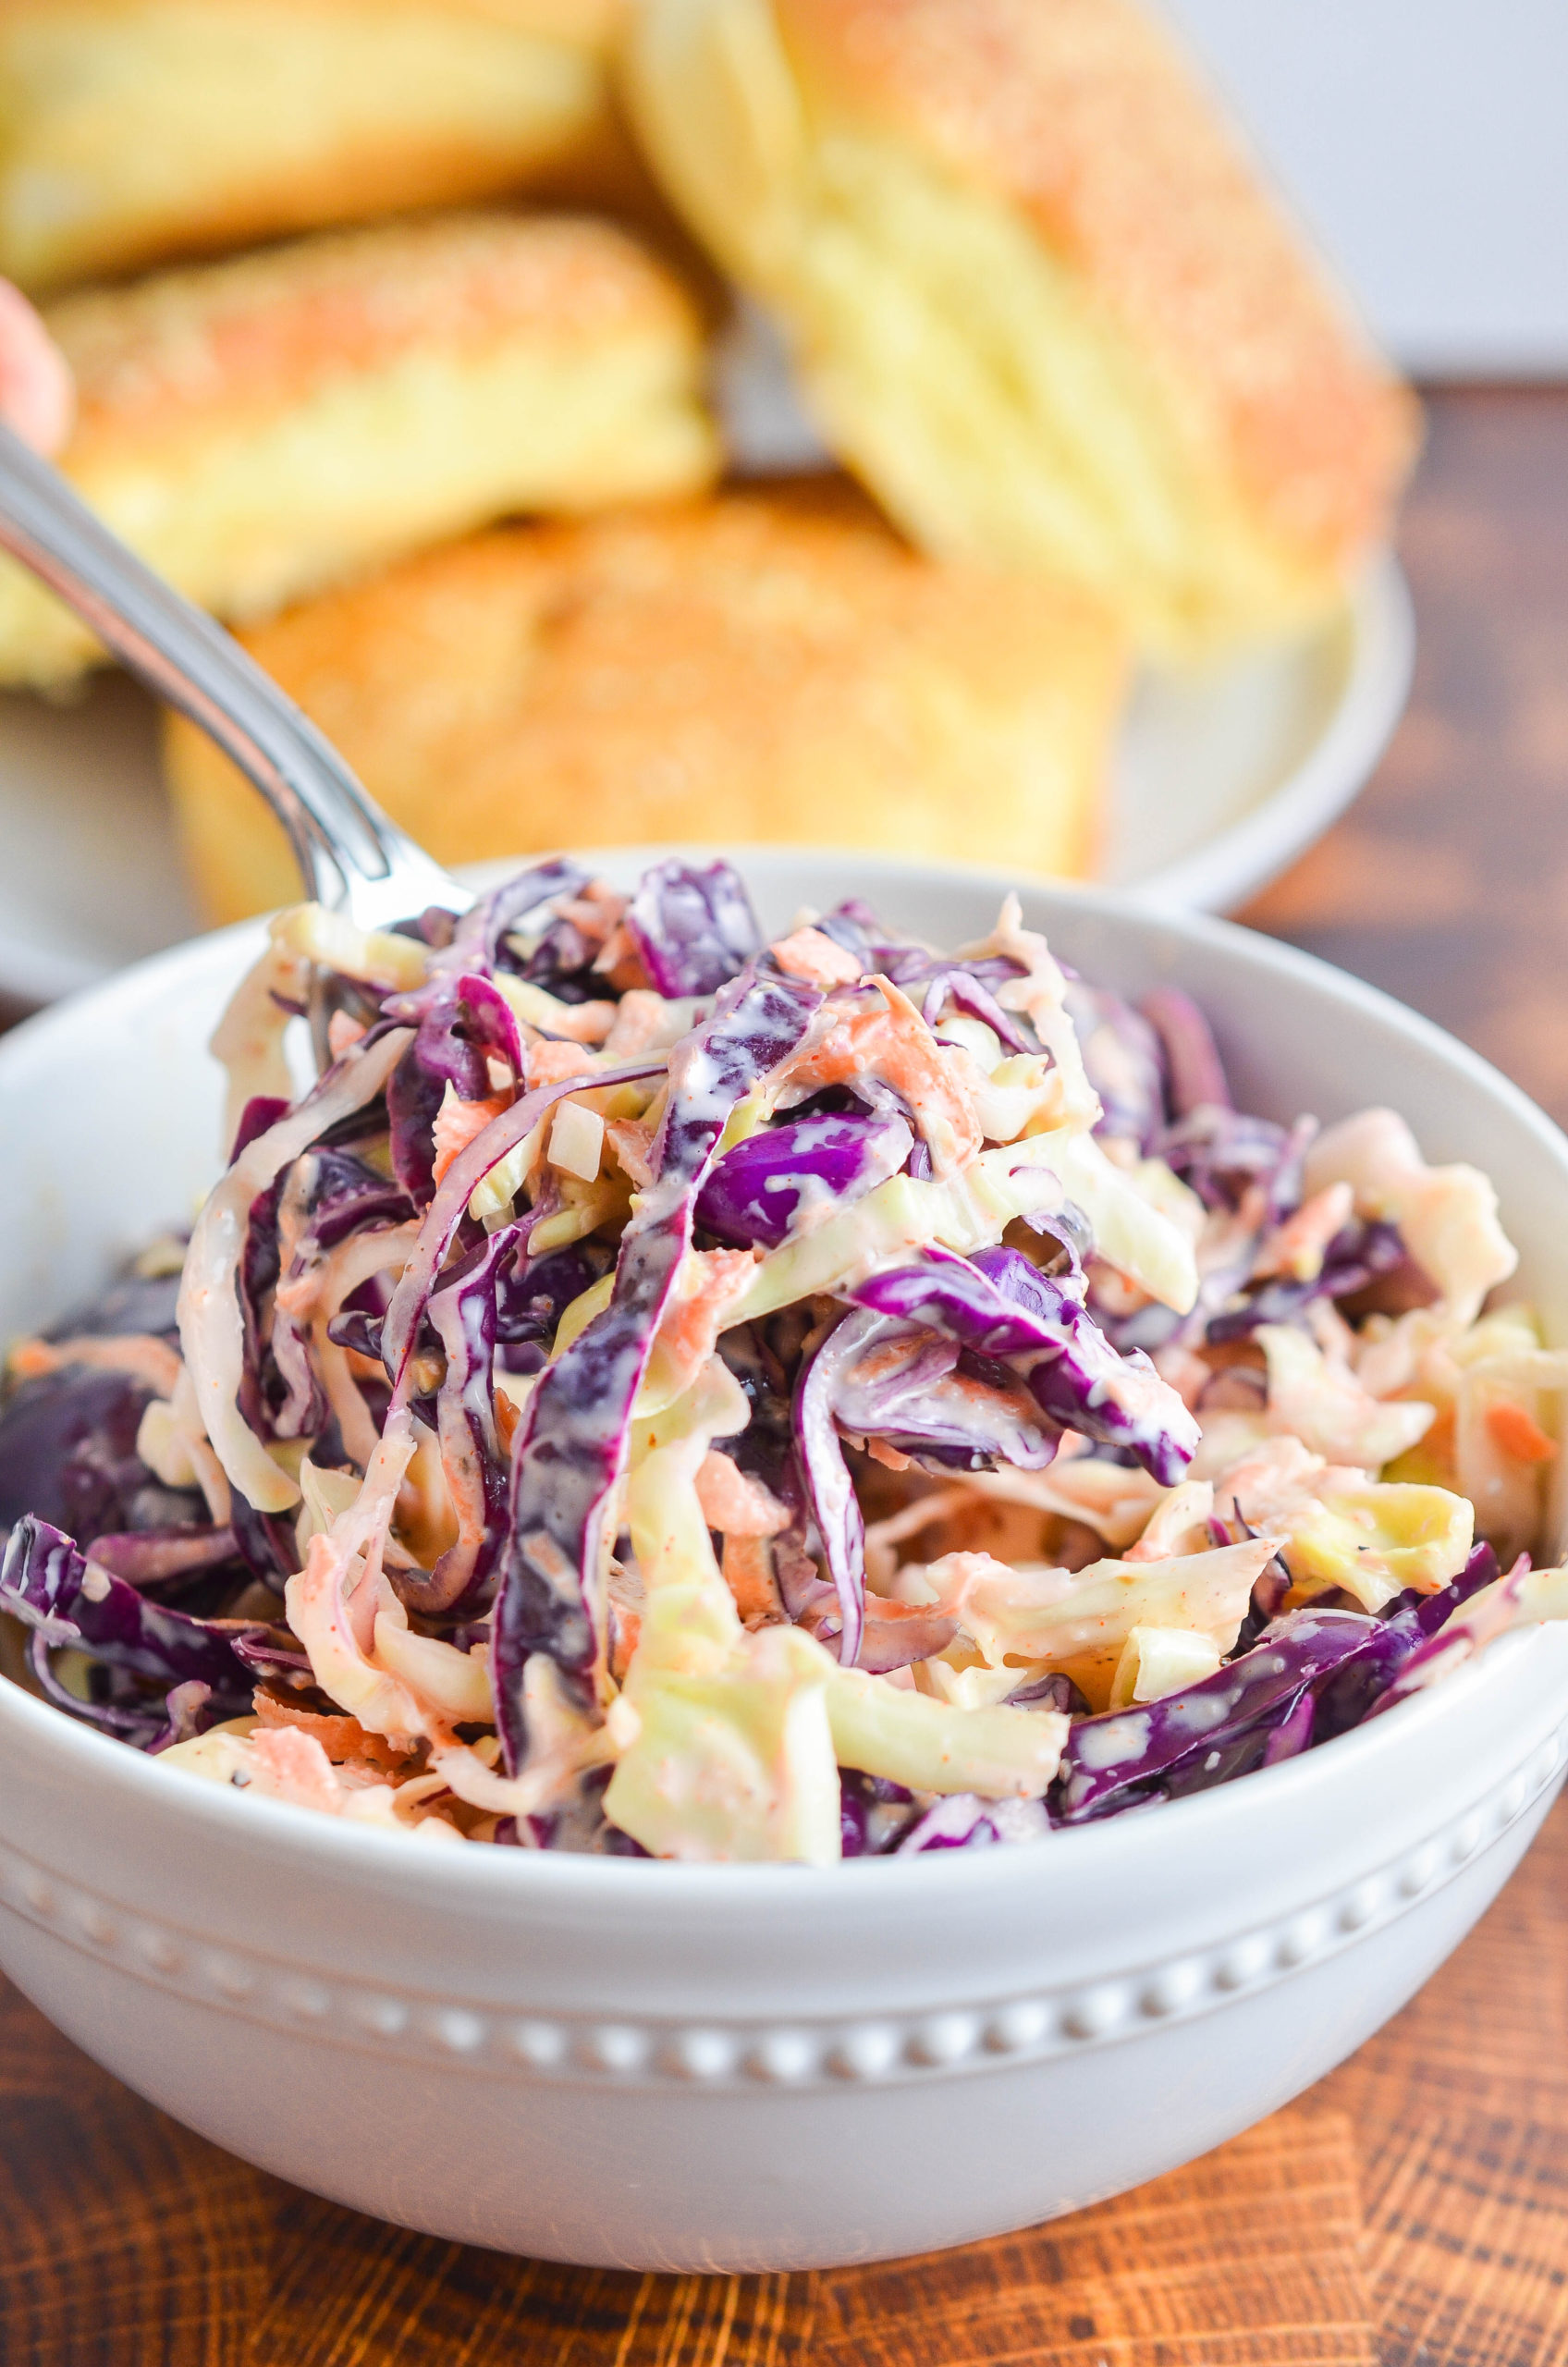 A spoonful of coleslaw. 